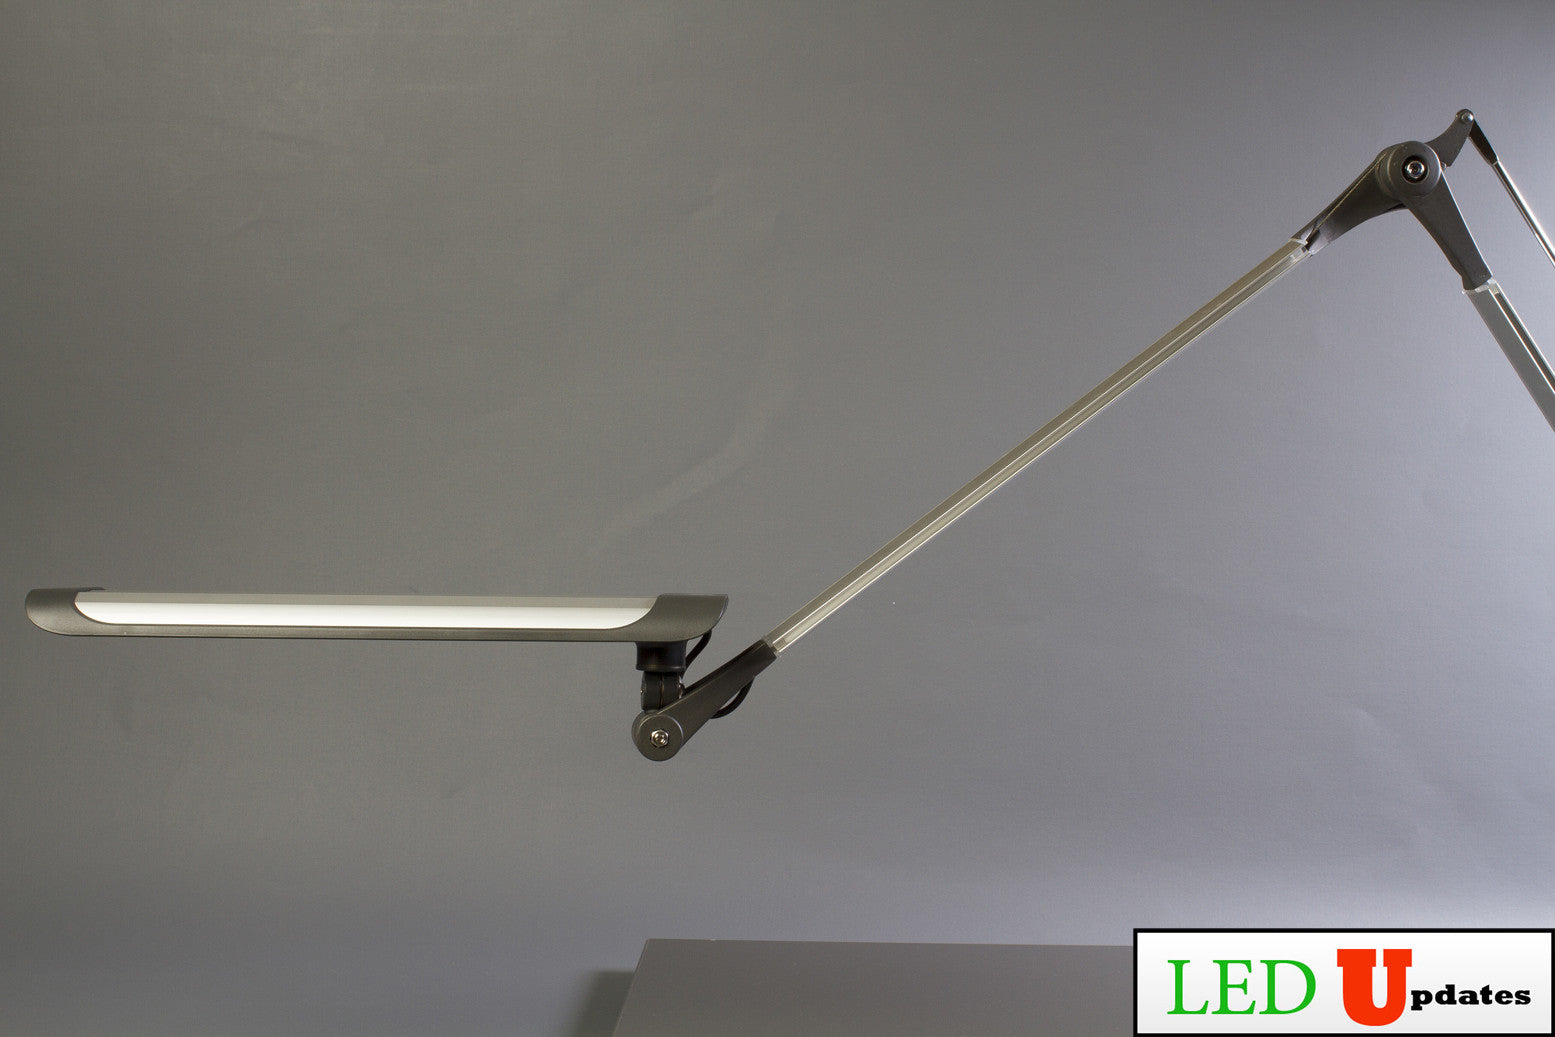 Clamp on Architect LED Desk Lamp with Multipoint adjustable arm